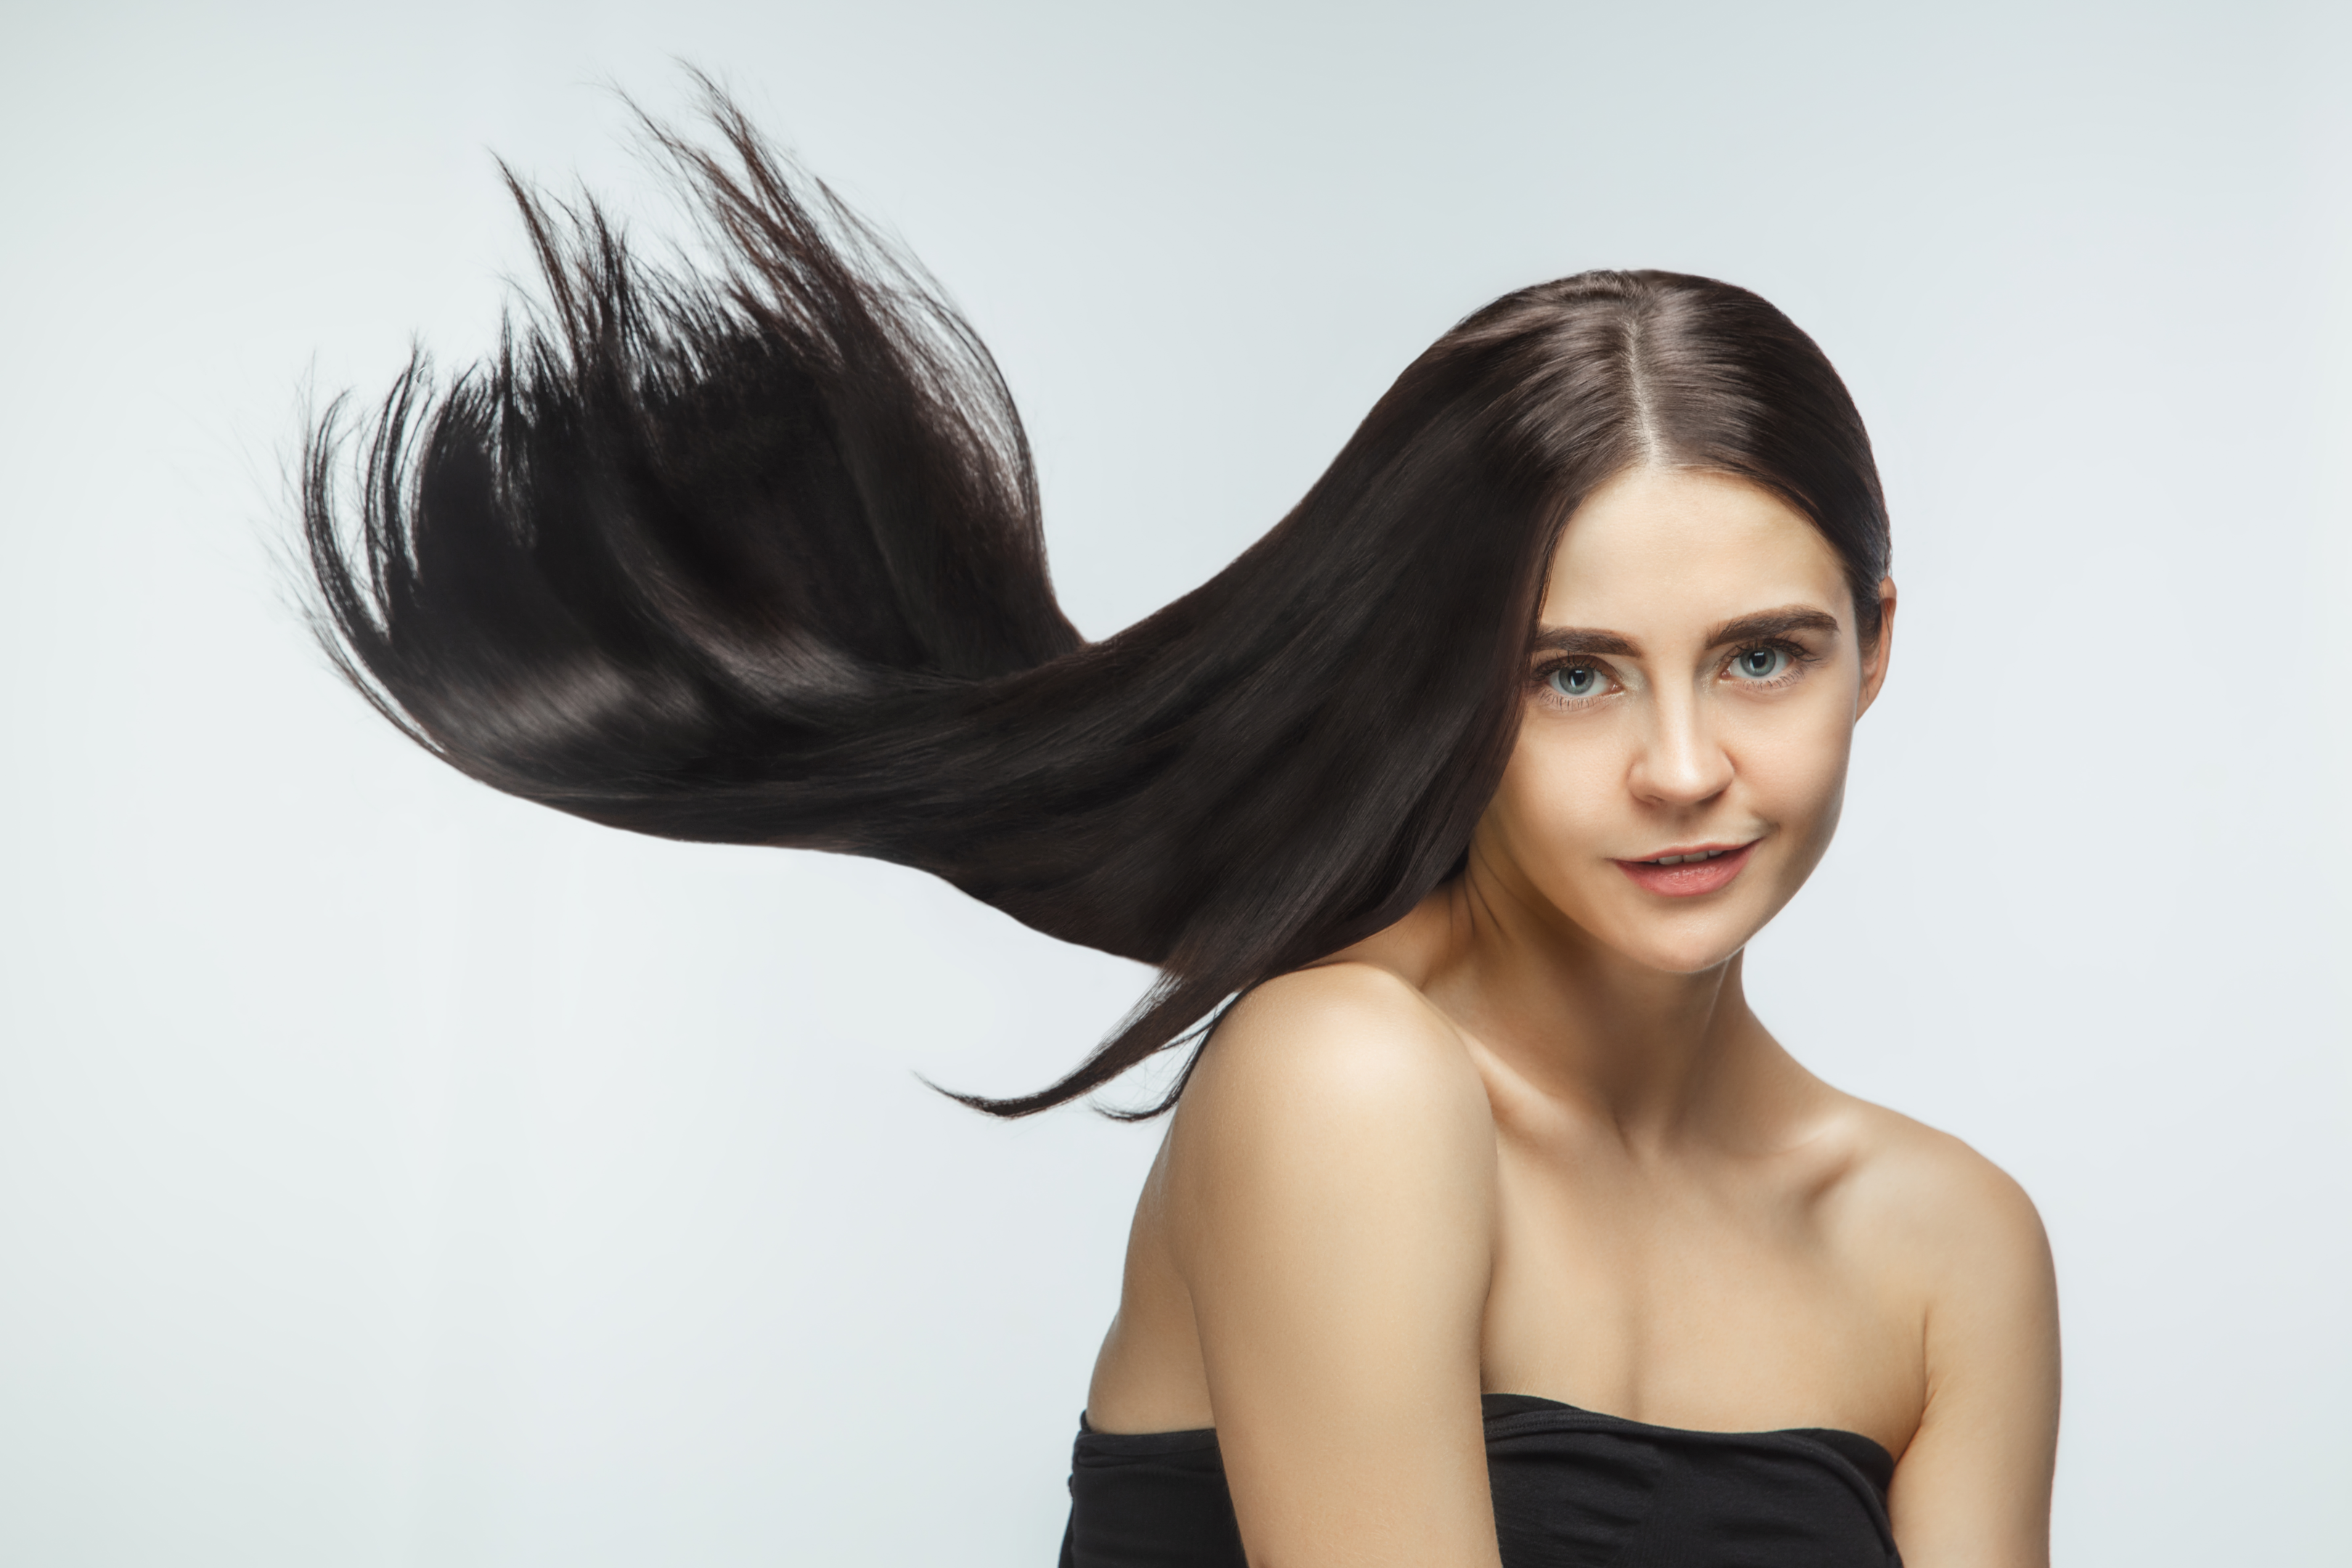 Healthy and strong hair enhances your physical appeal.